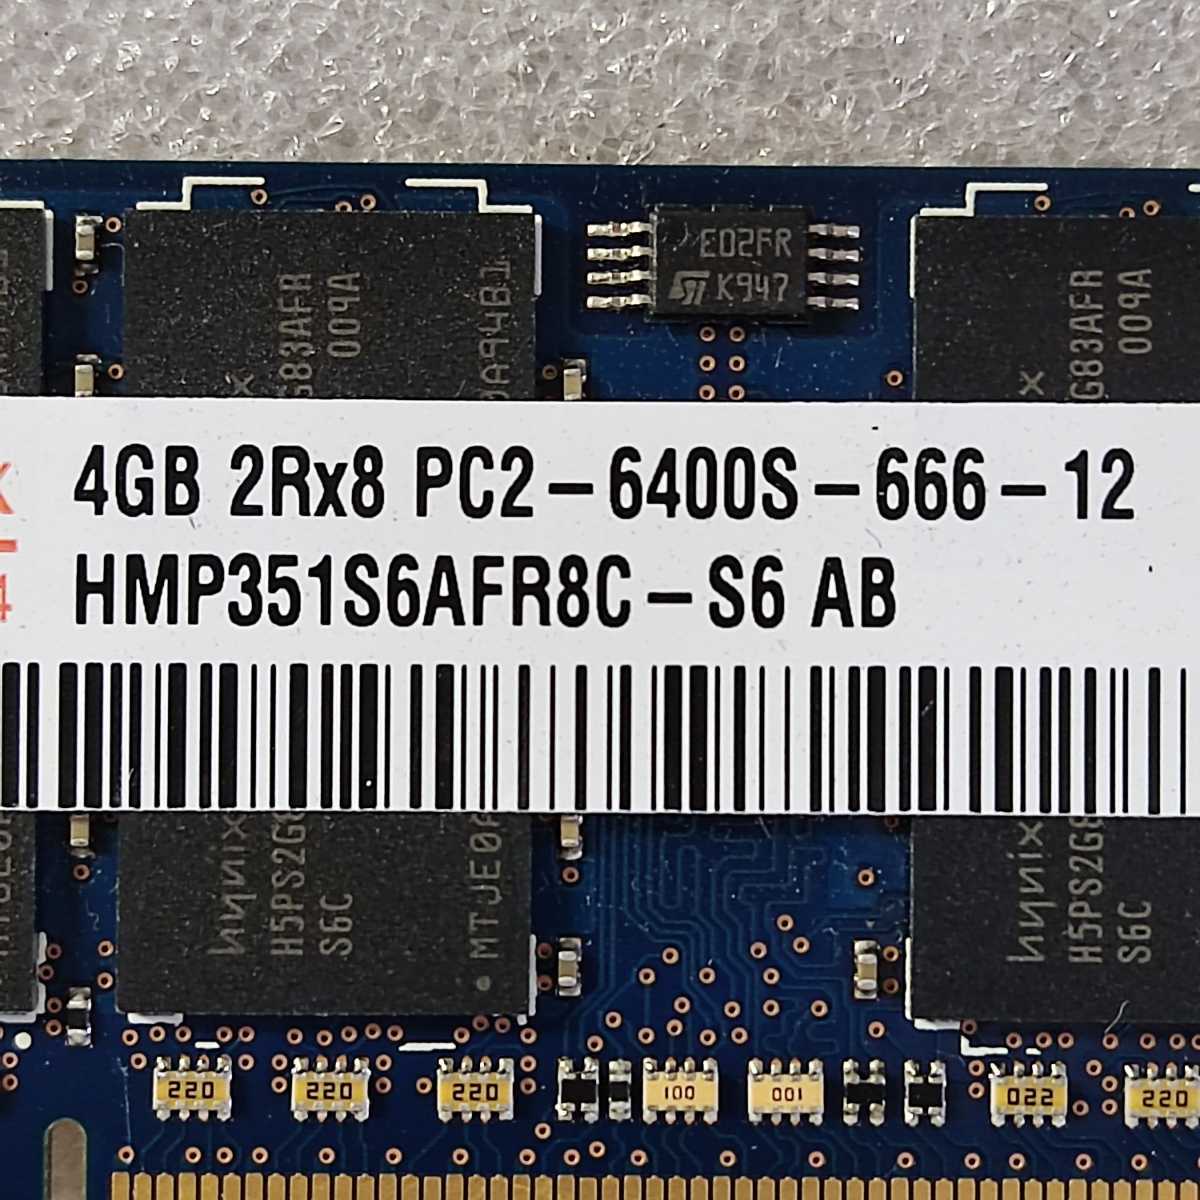  the same day departure special delivery carriage less hynix for laptop memory HMP351S6AFR8C-S6 AB 4GB 1 sheets 2Rx8 PC2-6400S-666-12 DDR2-800 * operation verification ending tube R098e